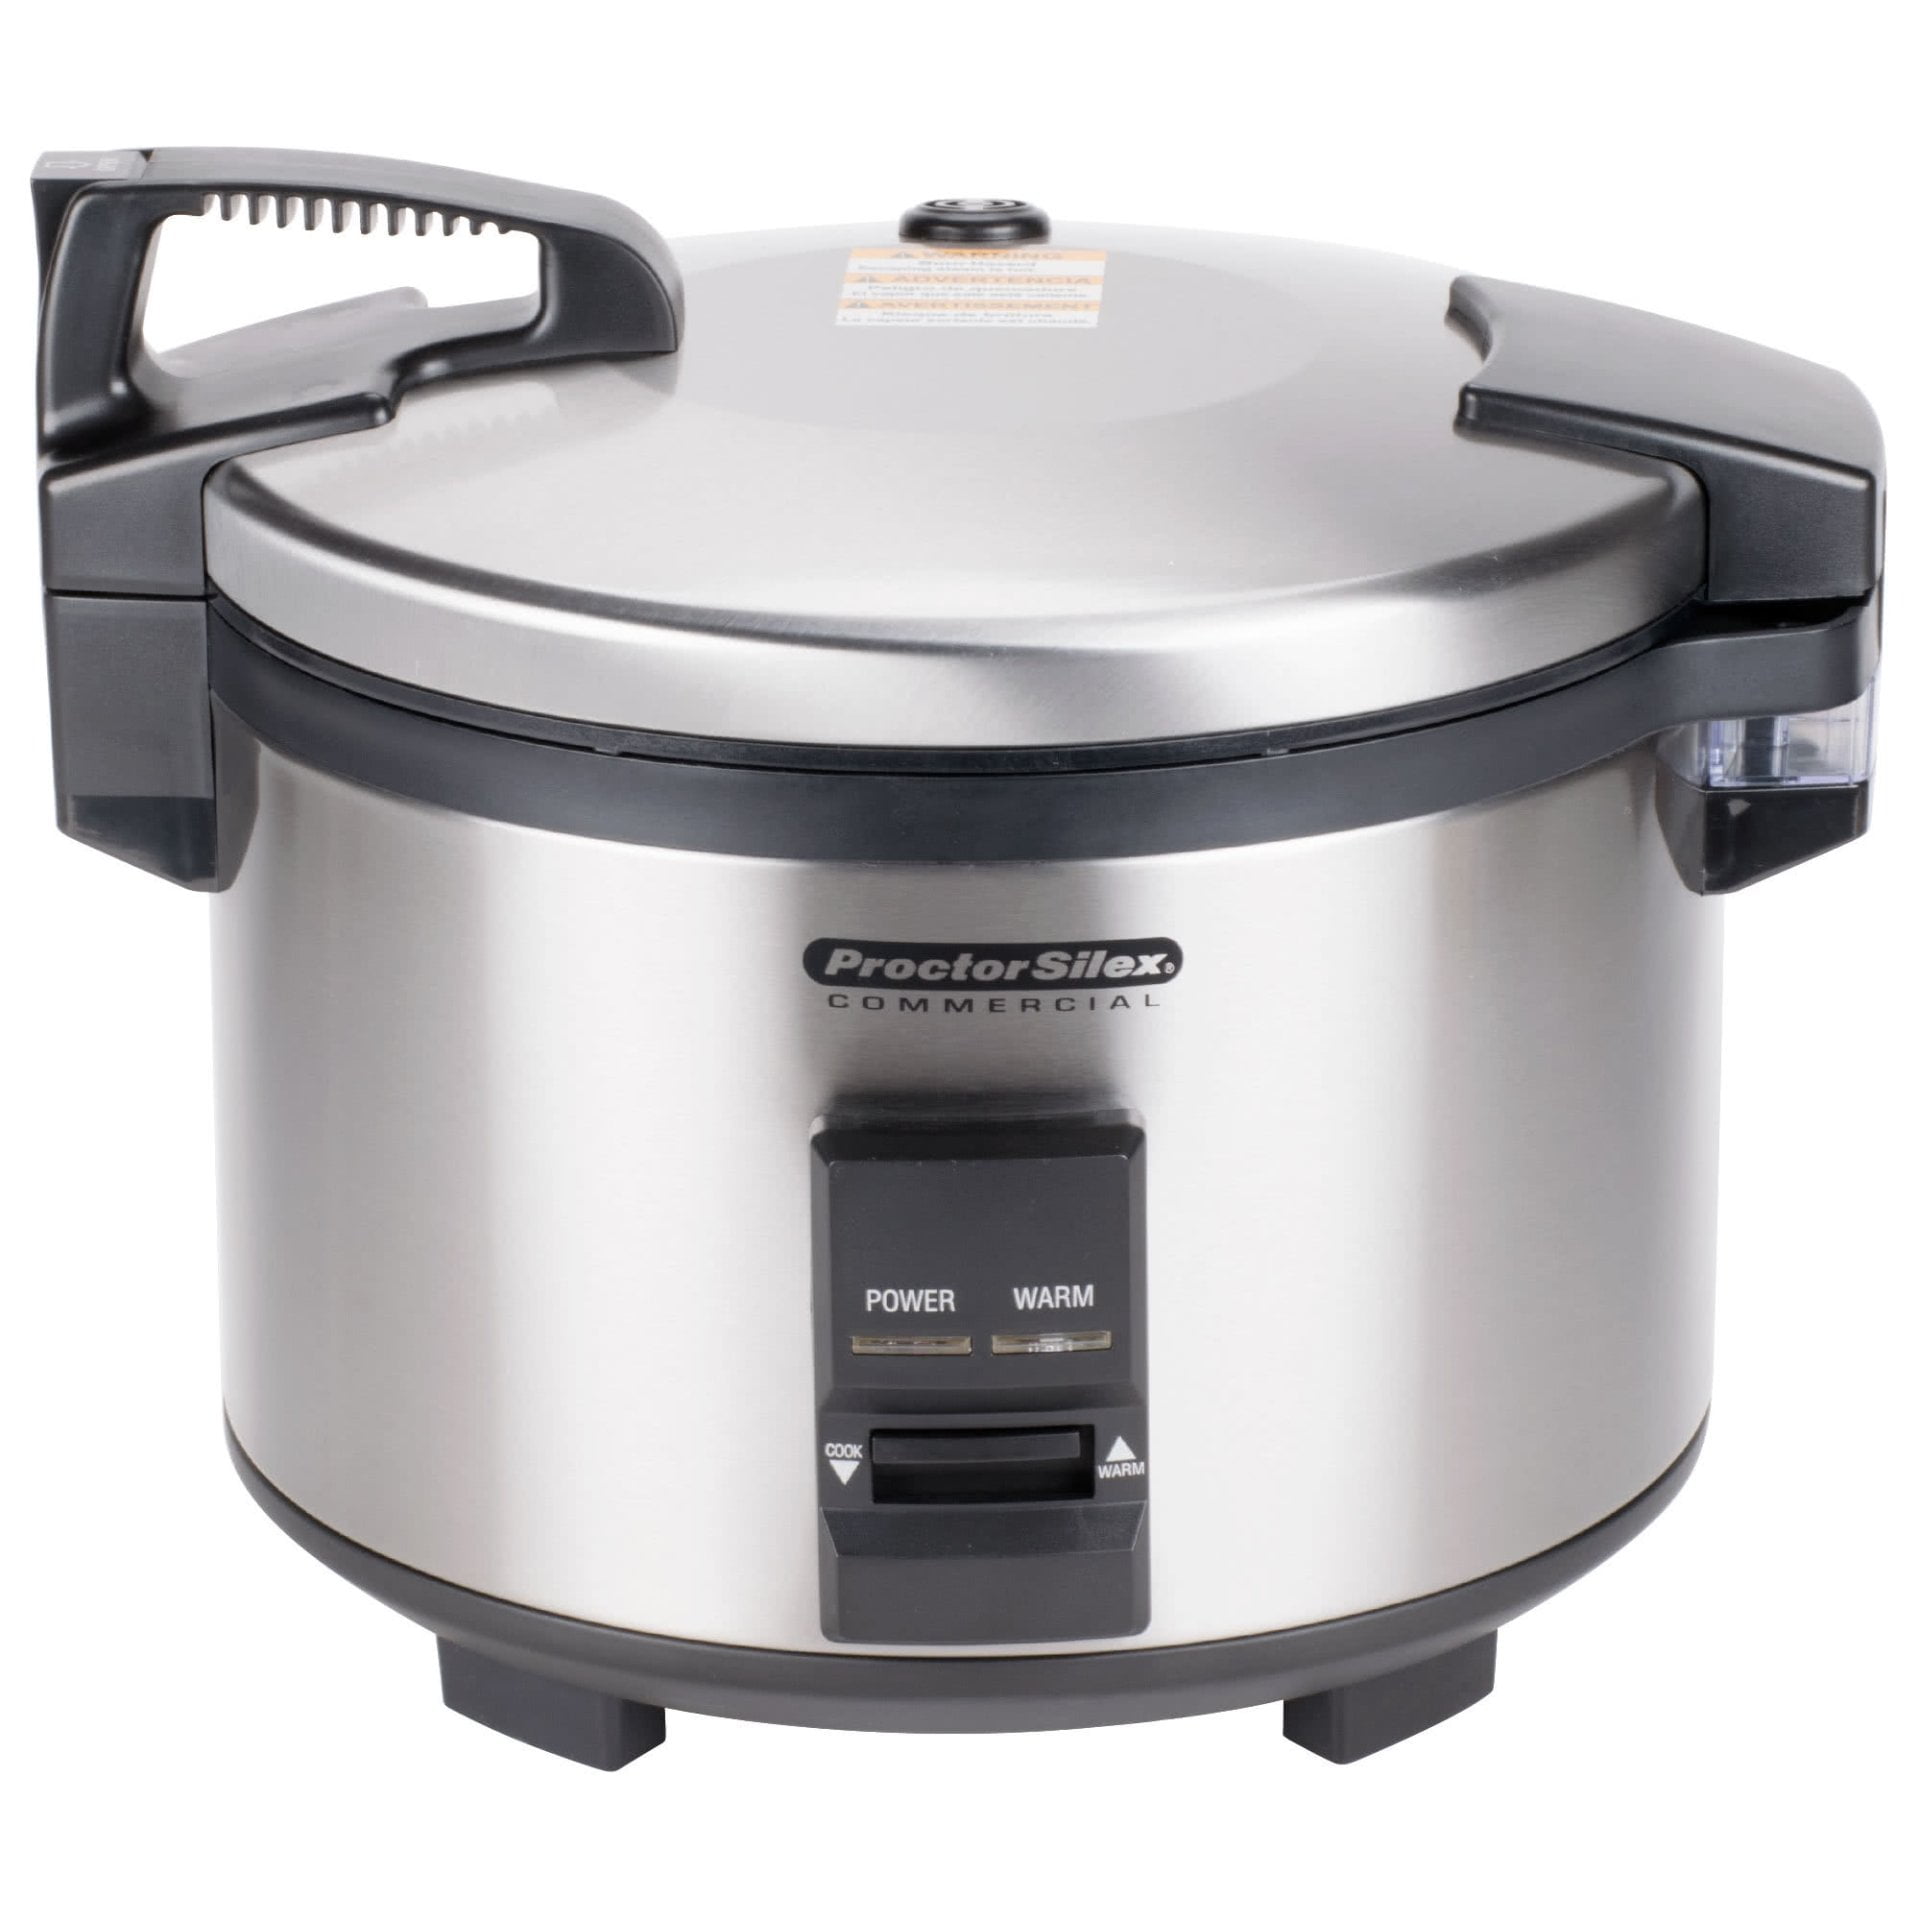 40 Cup Rice Cooker/Warmer (120V) with Measuring Cup & Paddle